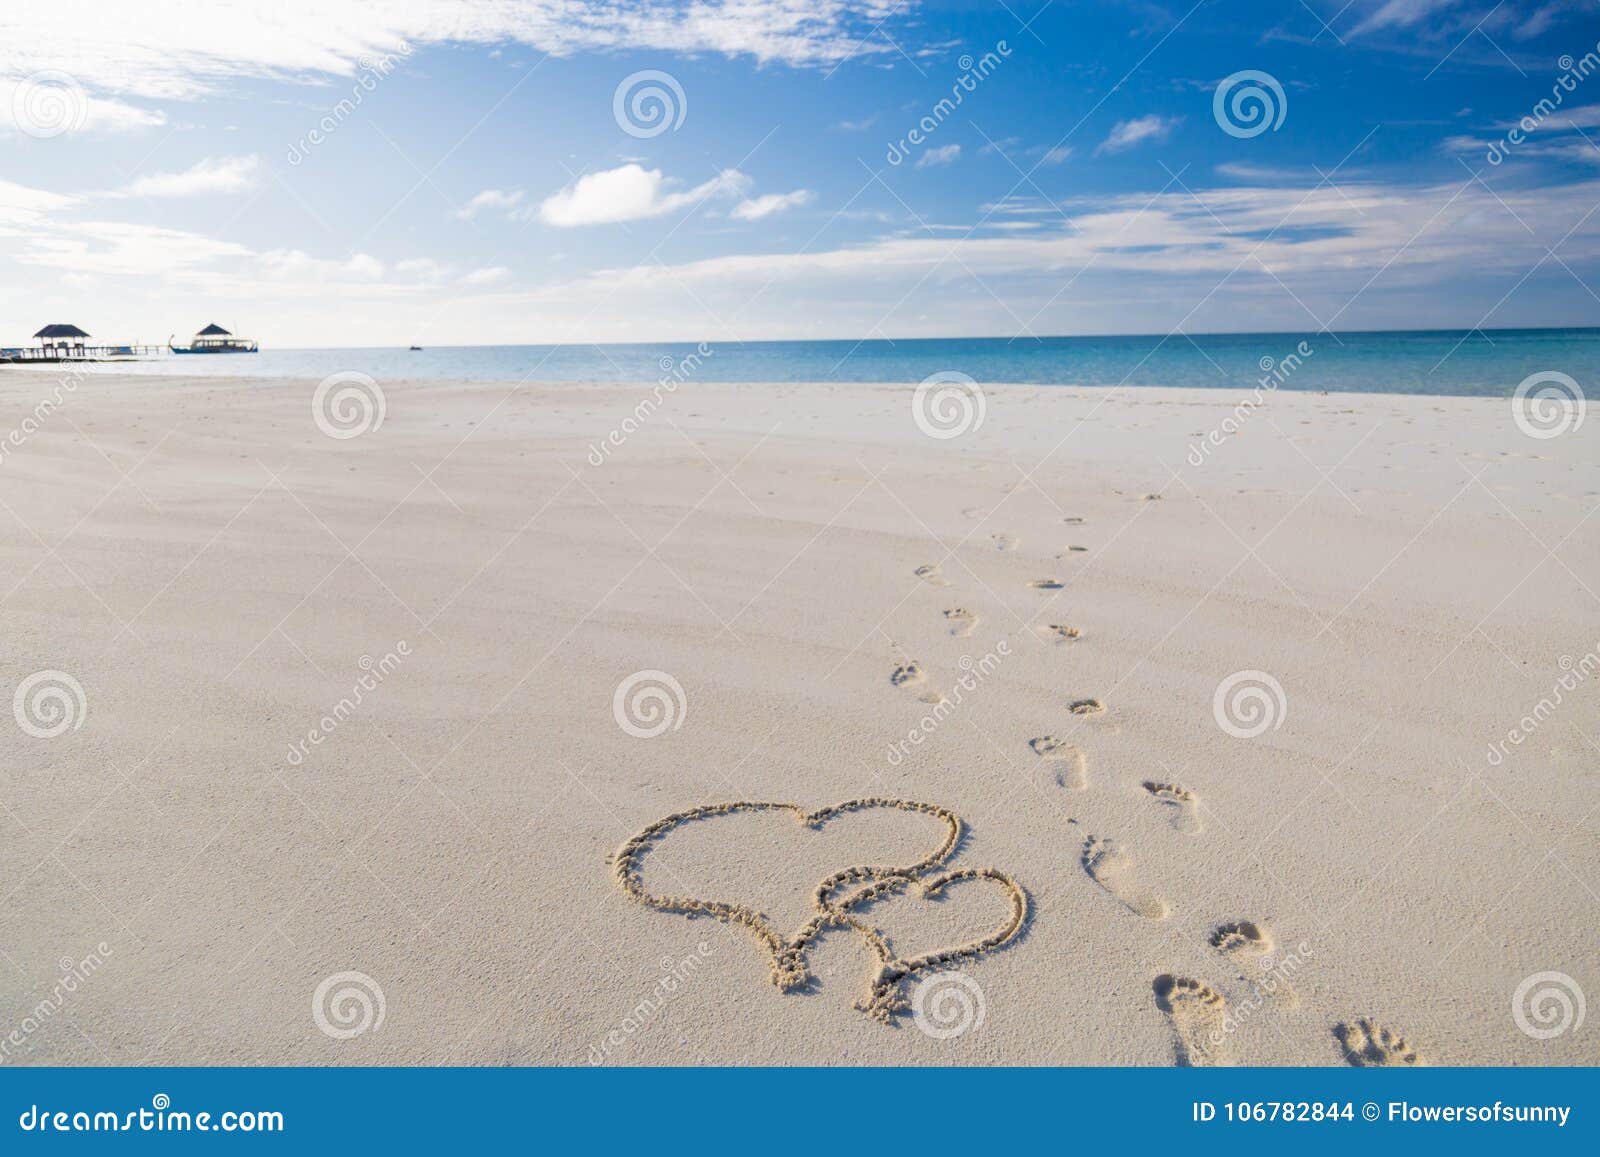 heart  drawing in the sand on tropical beach, romantic and honeymoon concept background for couples